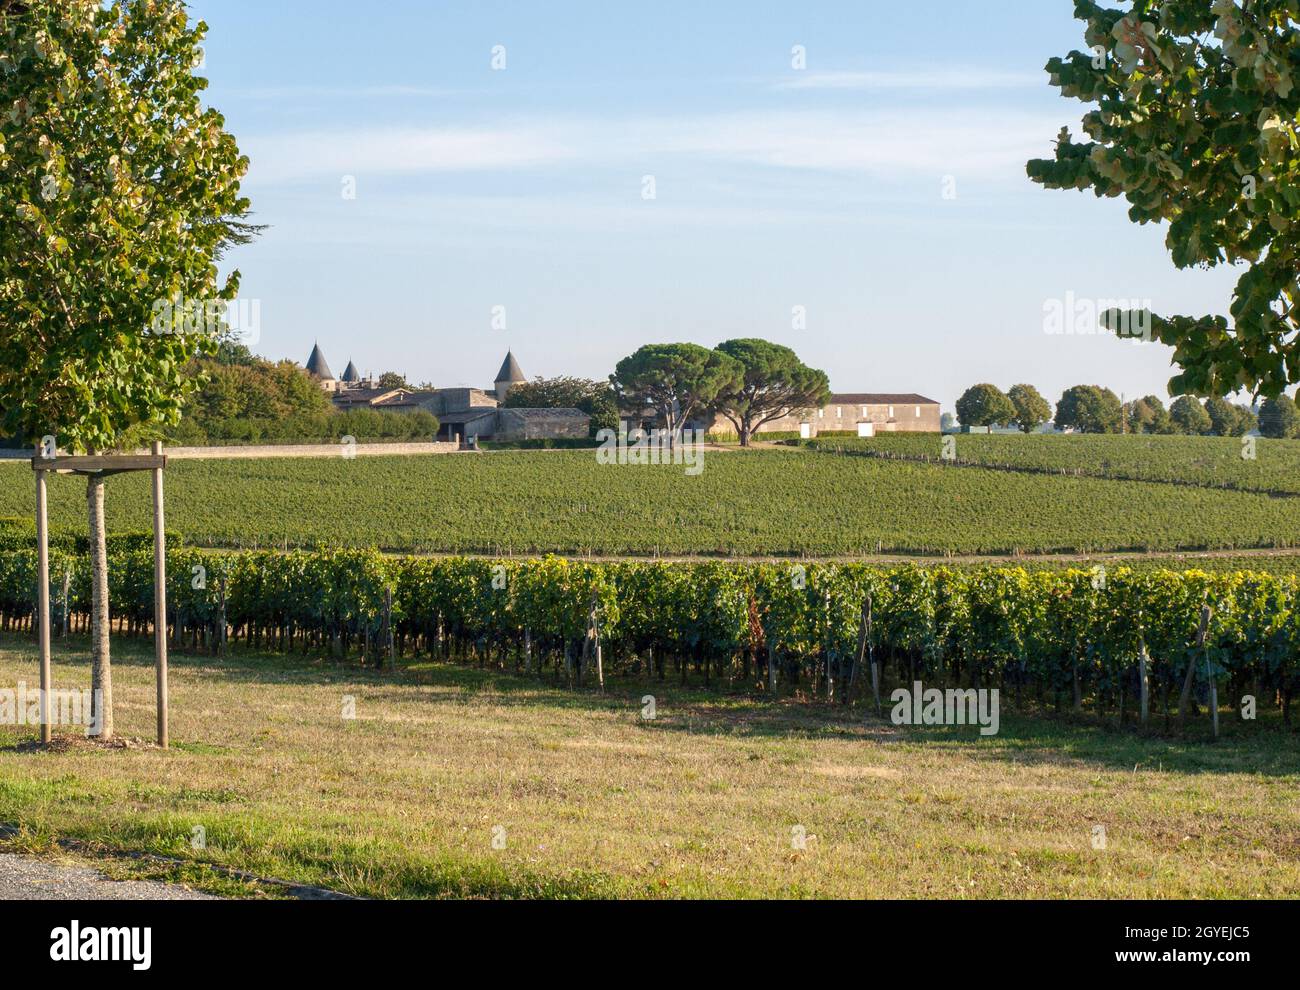 Ripe red Merlot grapes on rows of vines in a vienyard before the wine harvest in Saint Emilion region. France Stock Photo